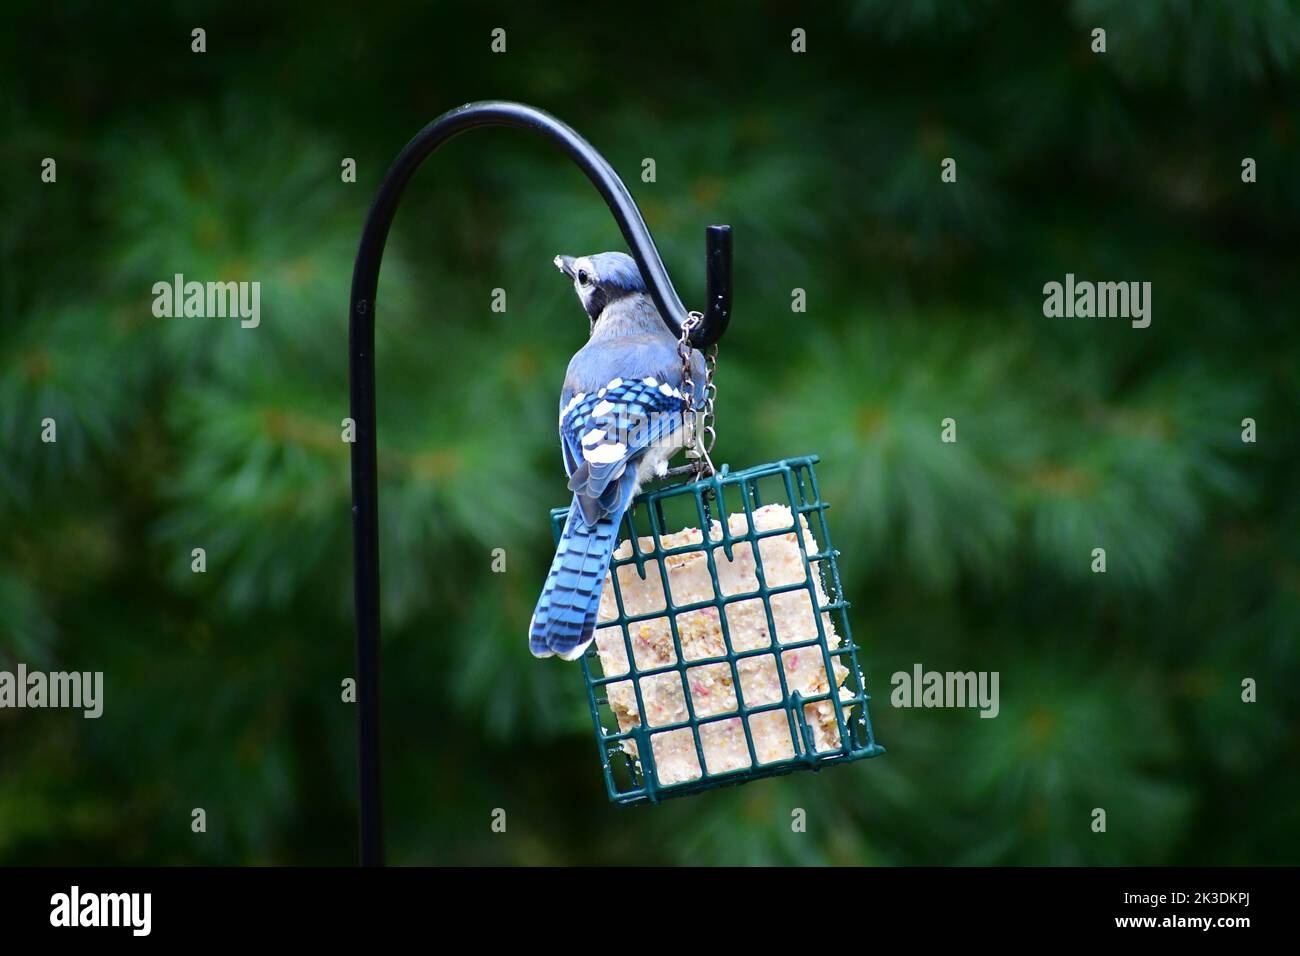 A wild Blue Jay eating from a feeder Stock Photo